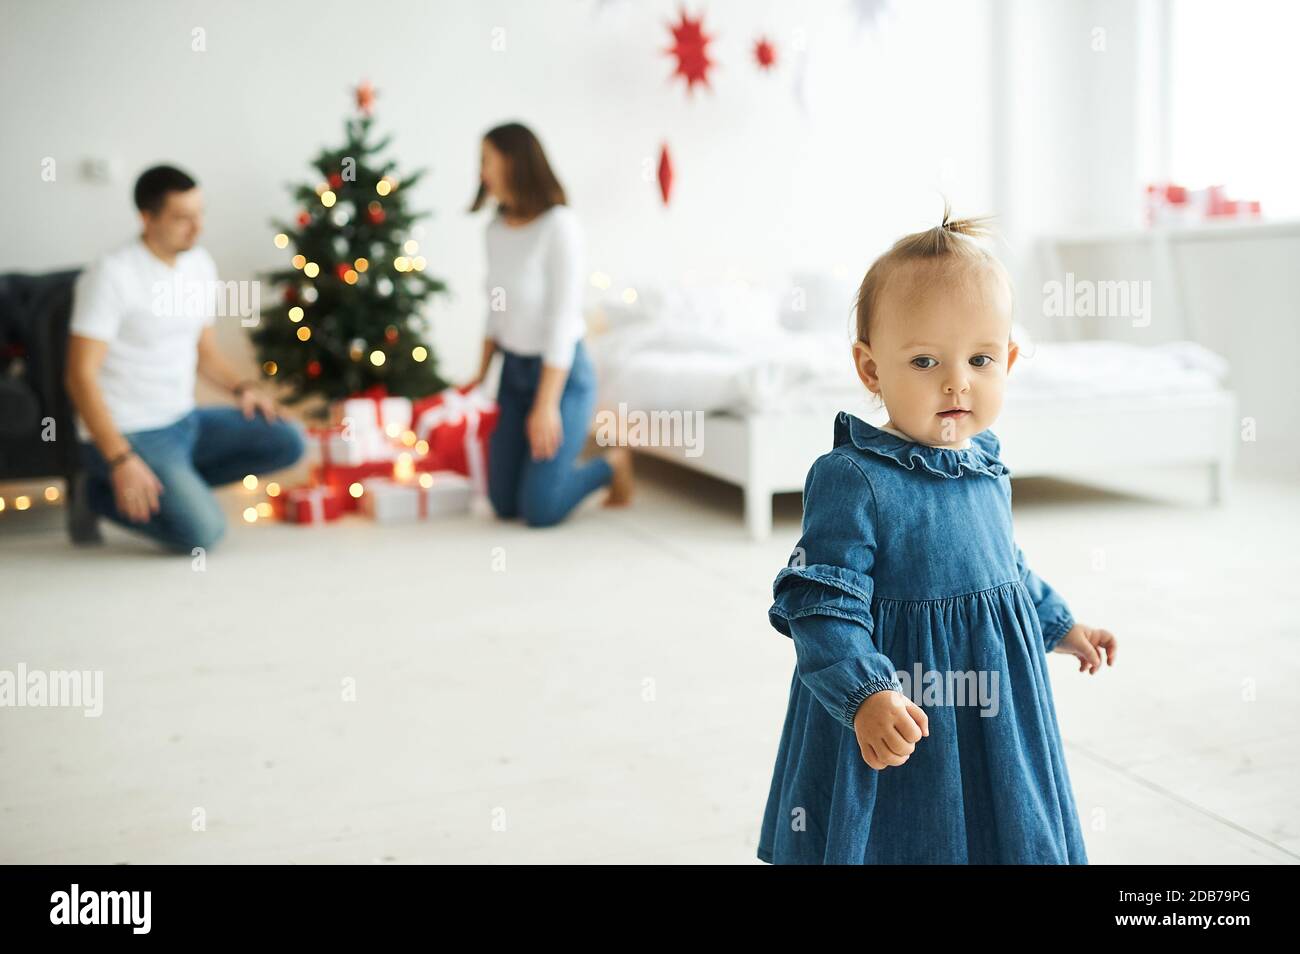 Portrait of a little baby girl dressed in a blue denim dress standing in a bright room. Stock Photo